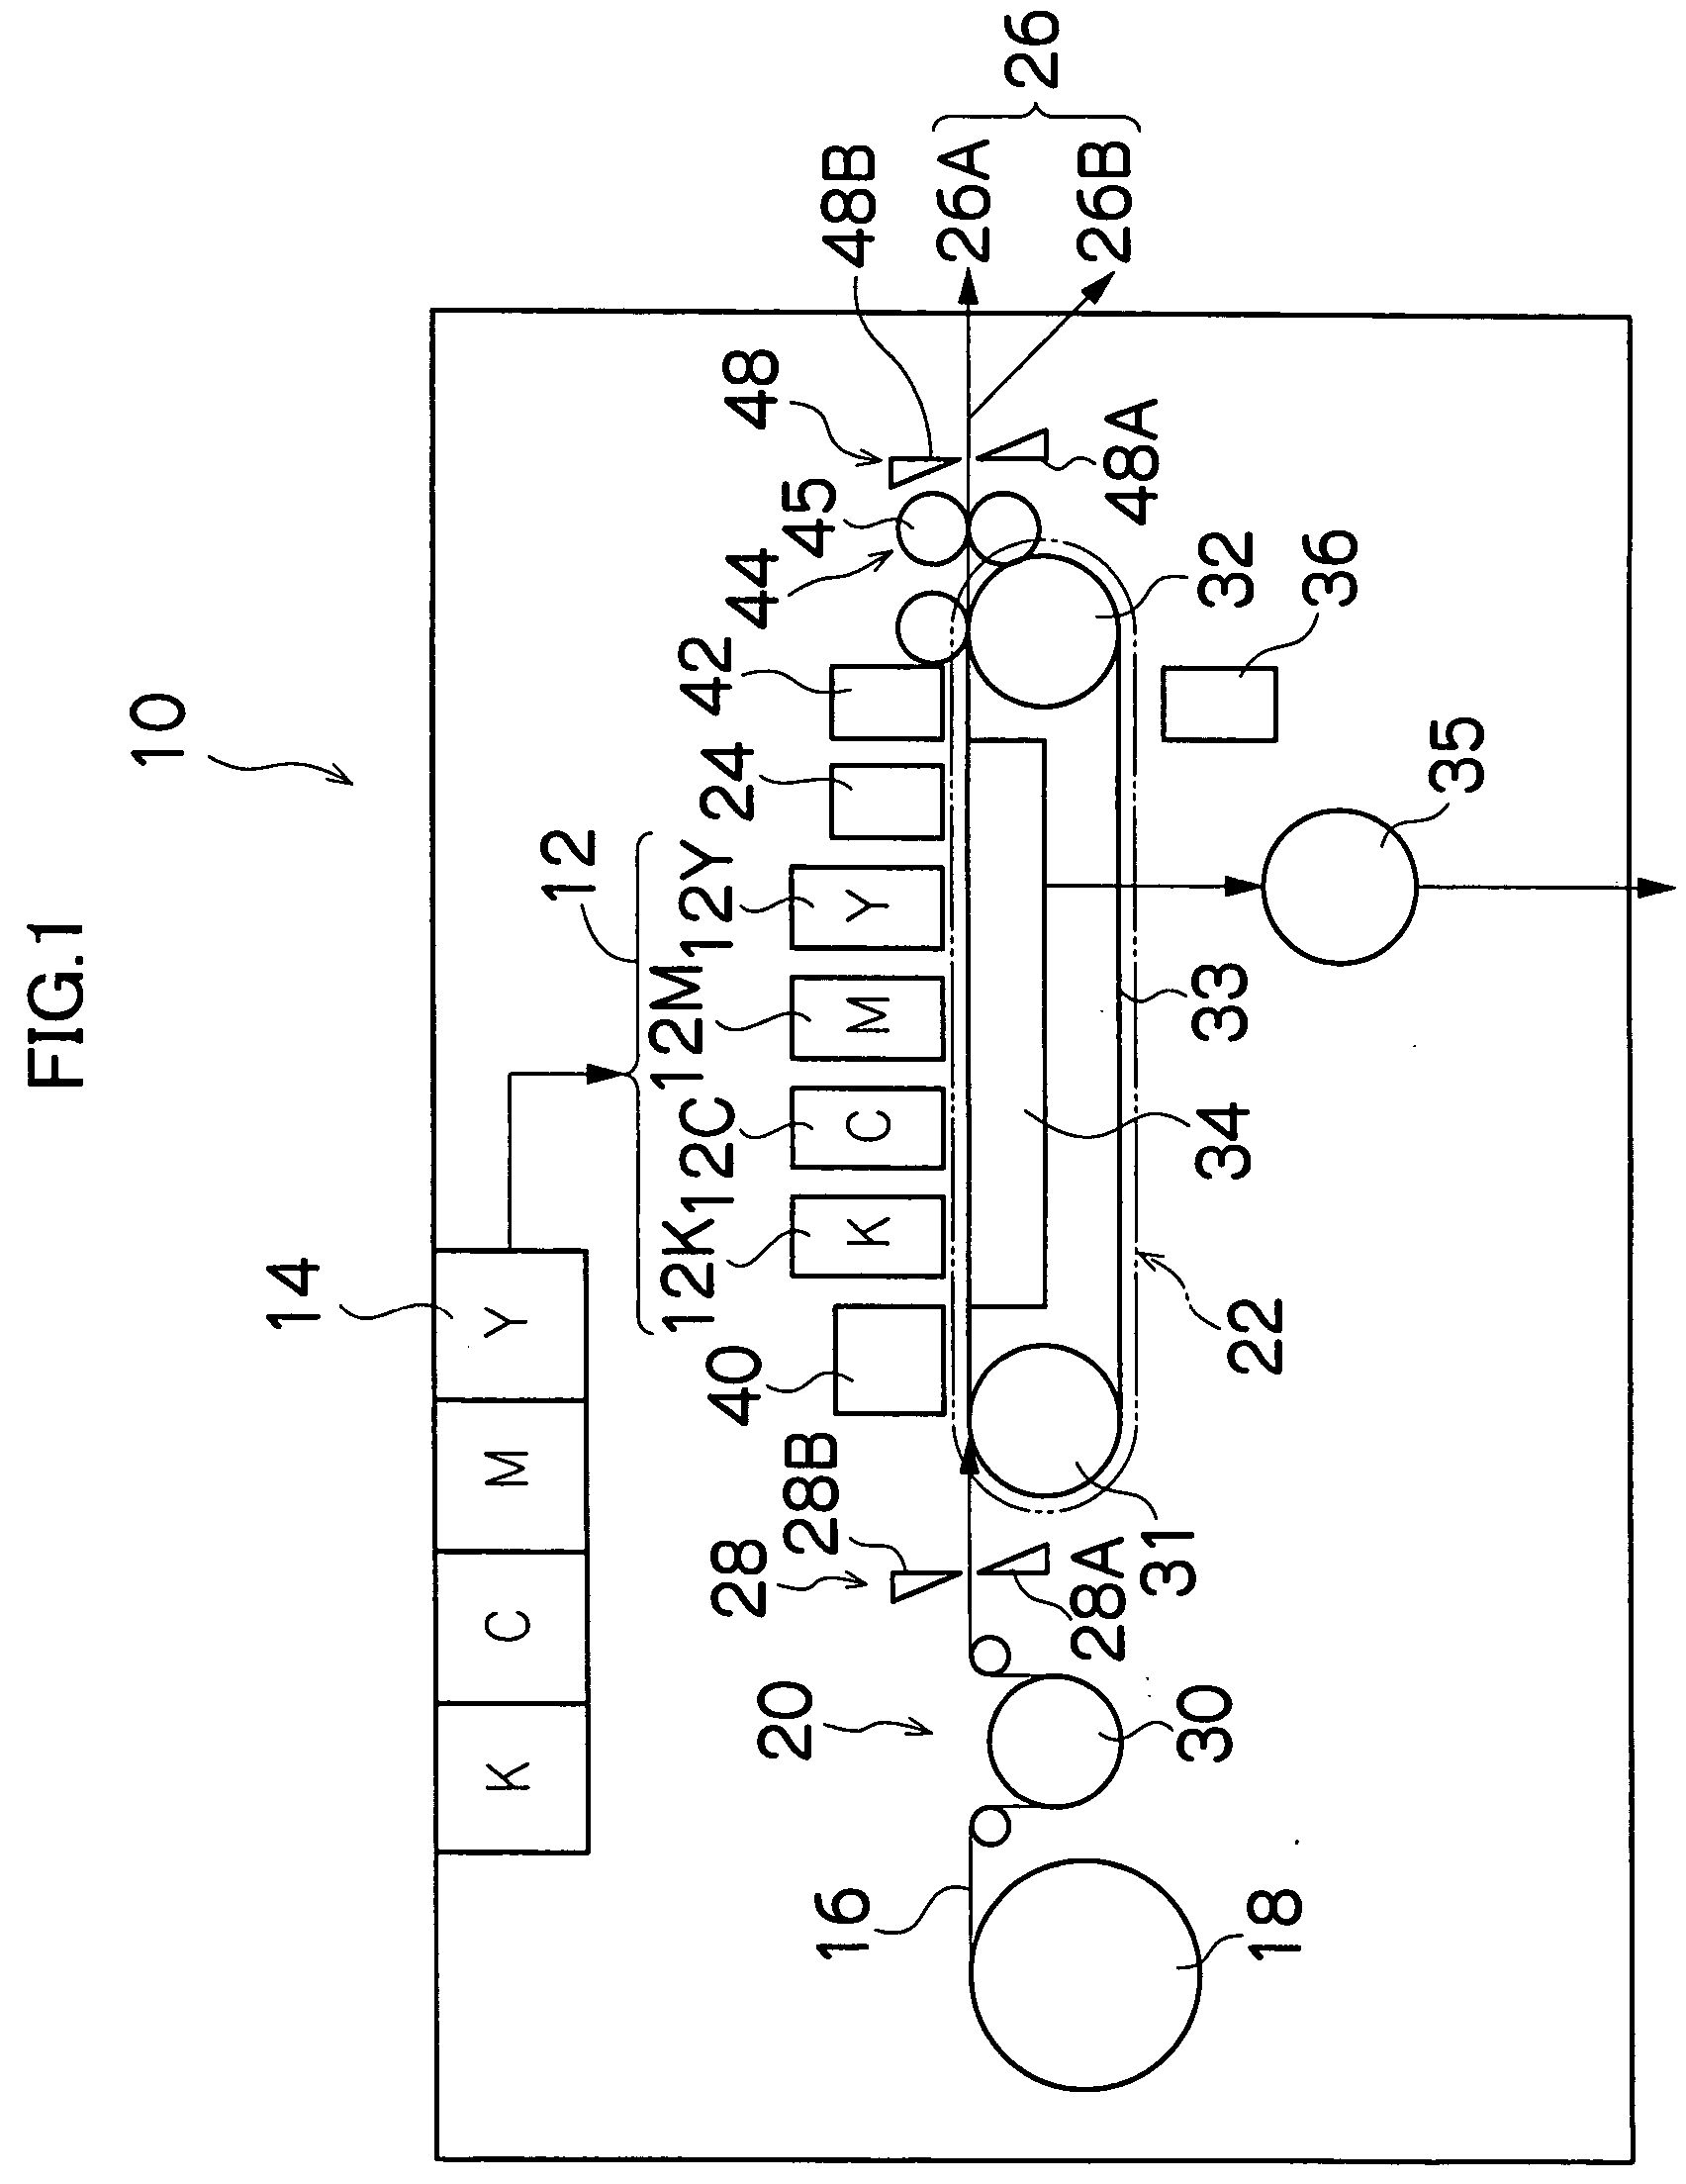 Image recording apparatus and method for determining defective image-recording elements